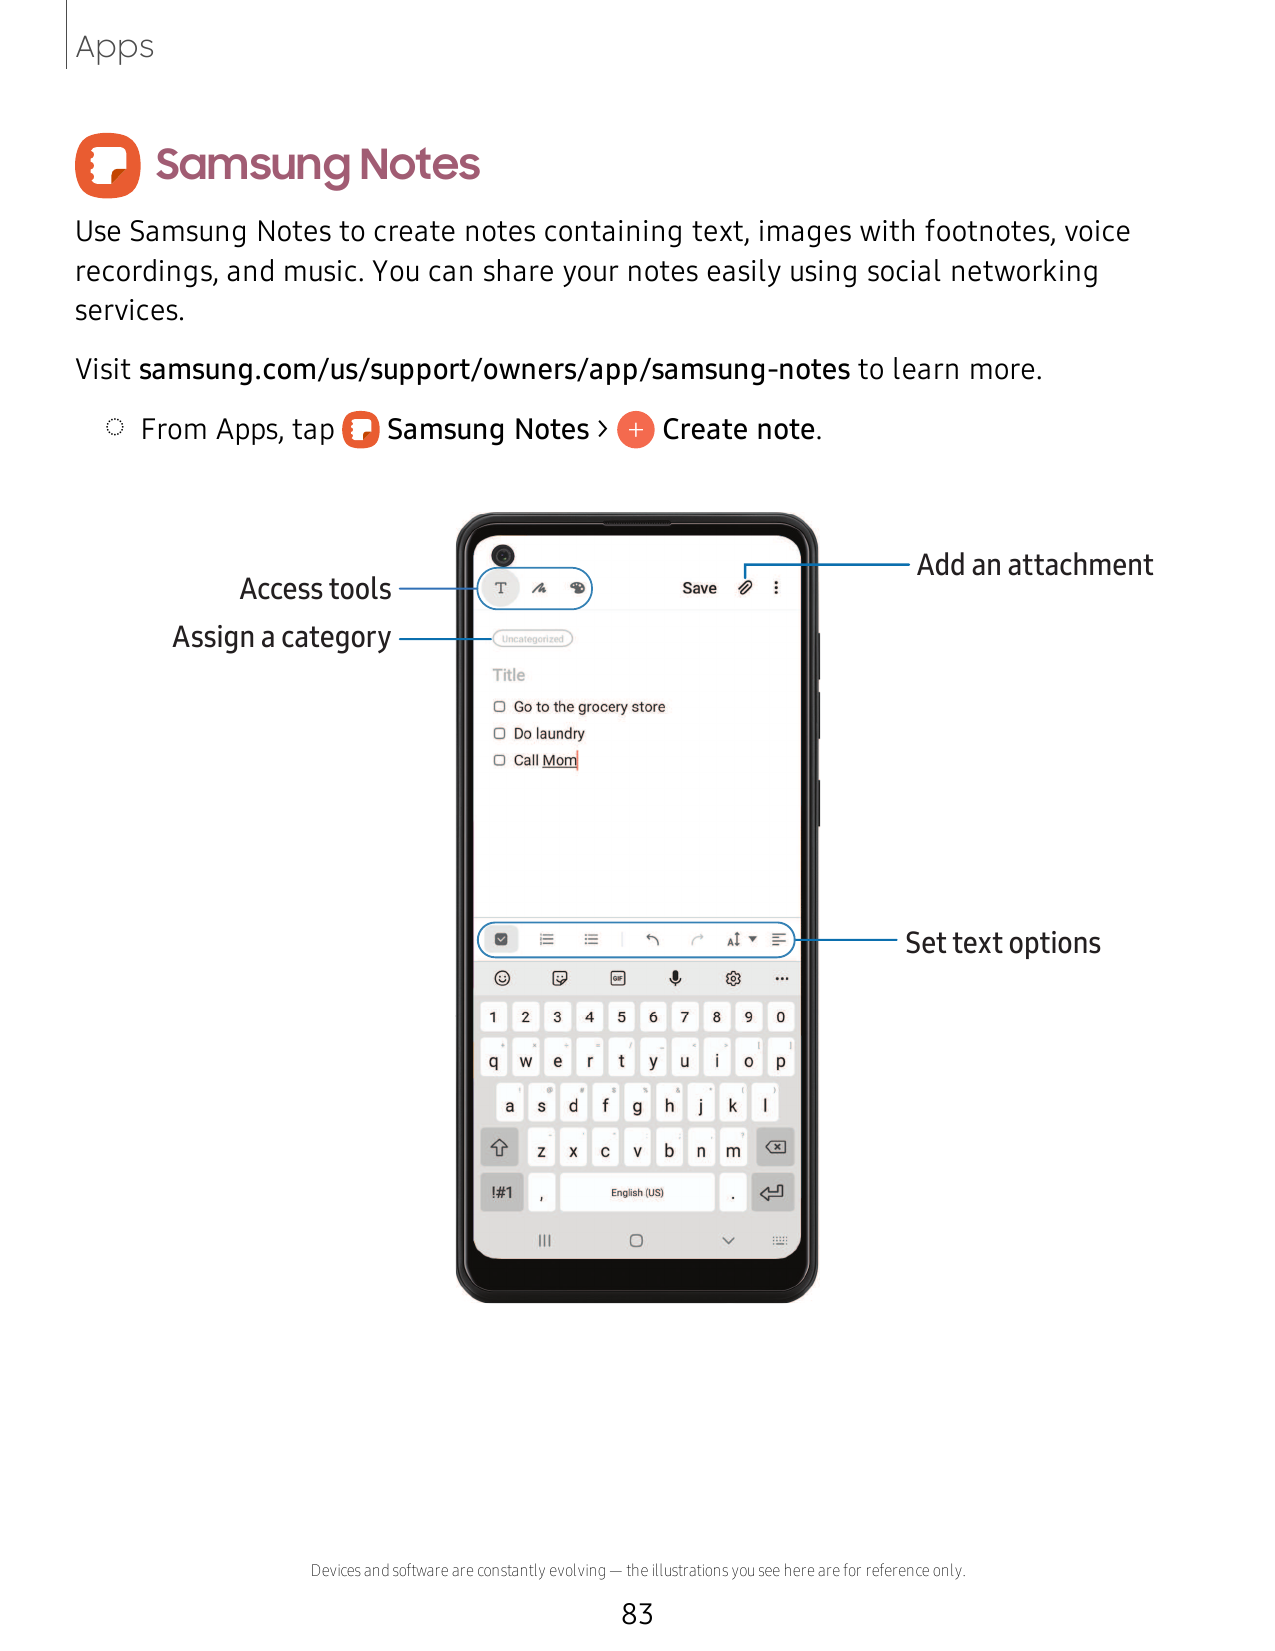 AppsSamsung NotesUse Samsung Notes to create notes containing text, images with footnotes, voicerecordings, and music. You can s